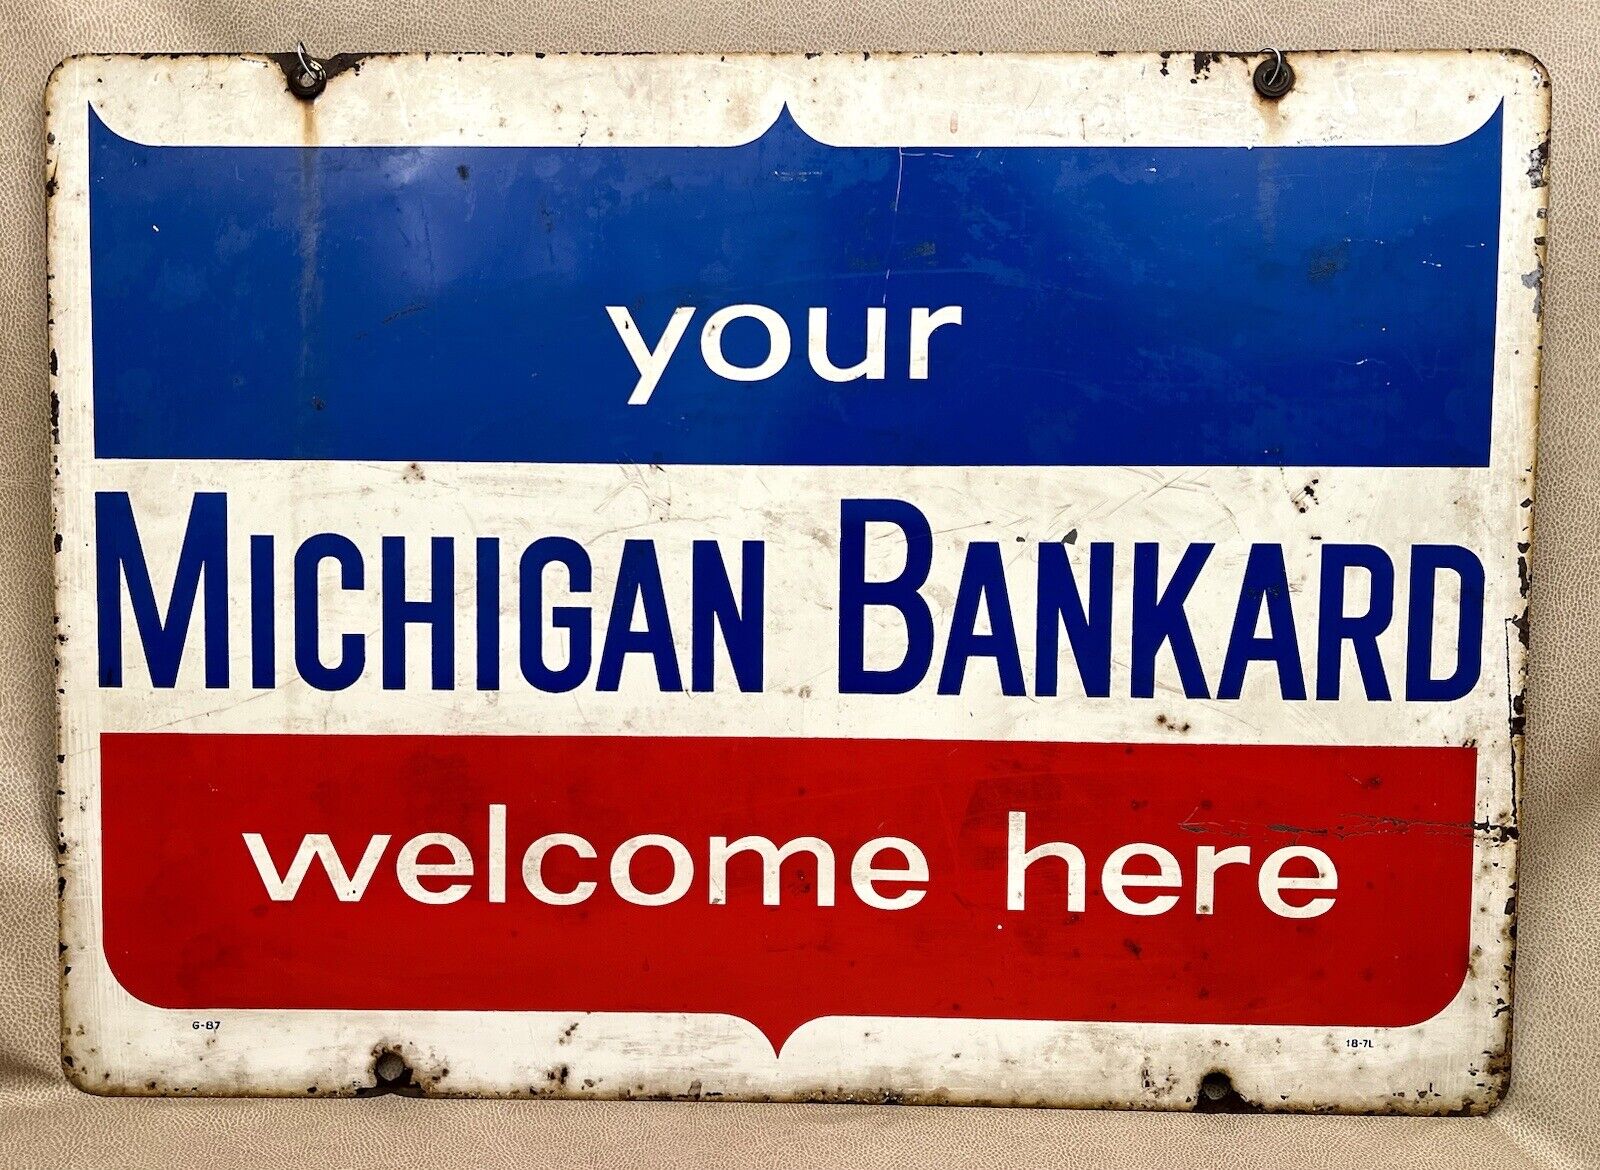 Large Vintage Michigan Bankard Double Sided Metal Sign - 28“ W x 20“ H